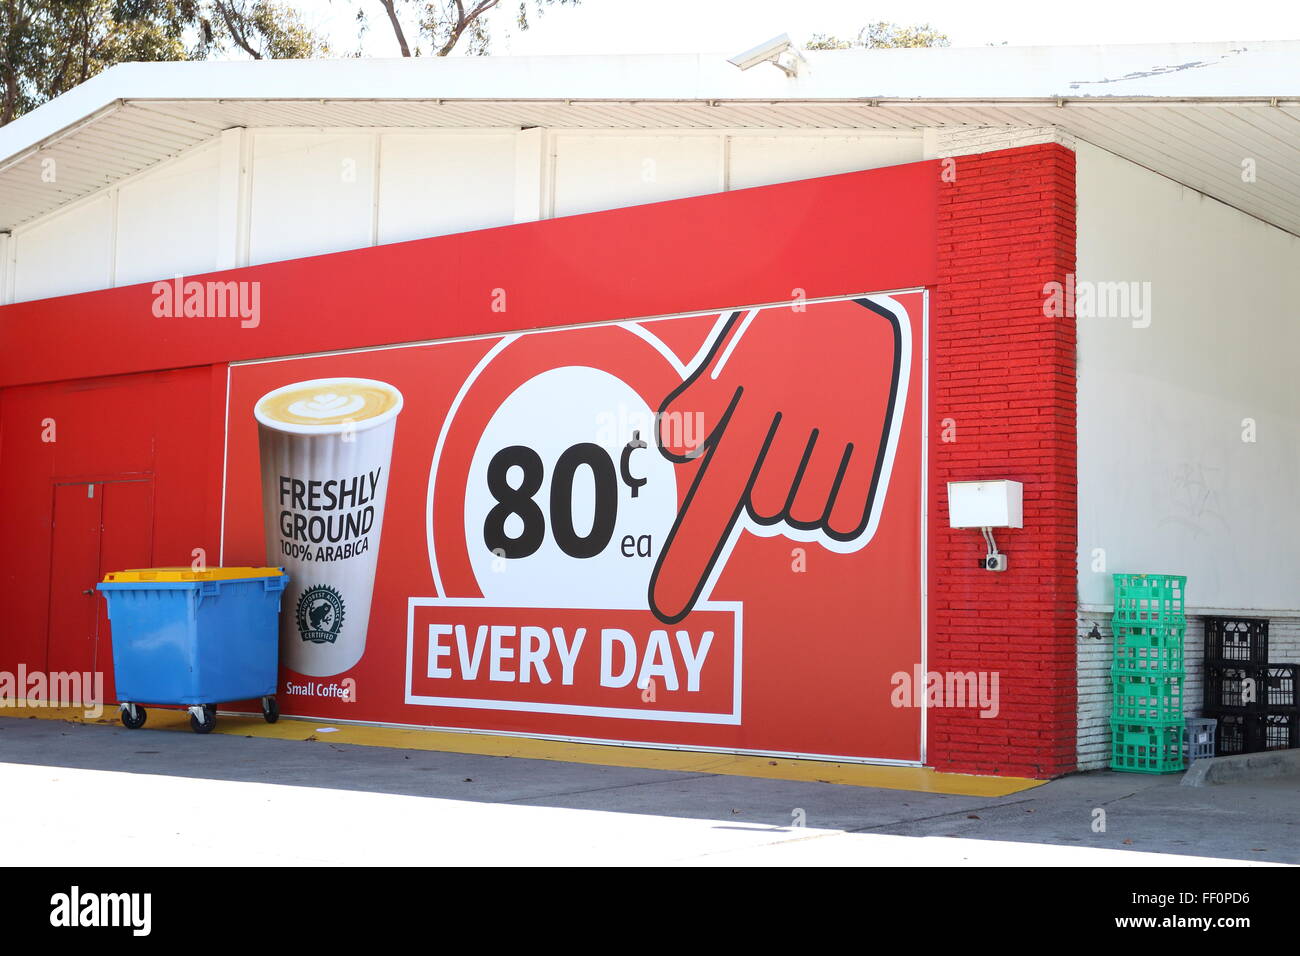 One of the biggest Australian supermarket Coles advertisement on the wall Stock Photo